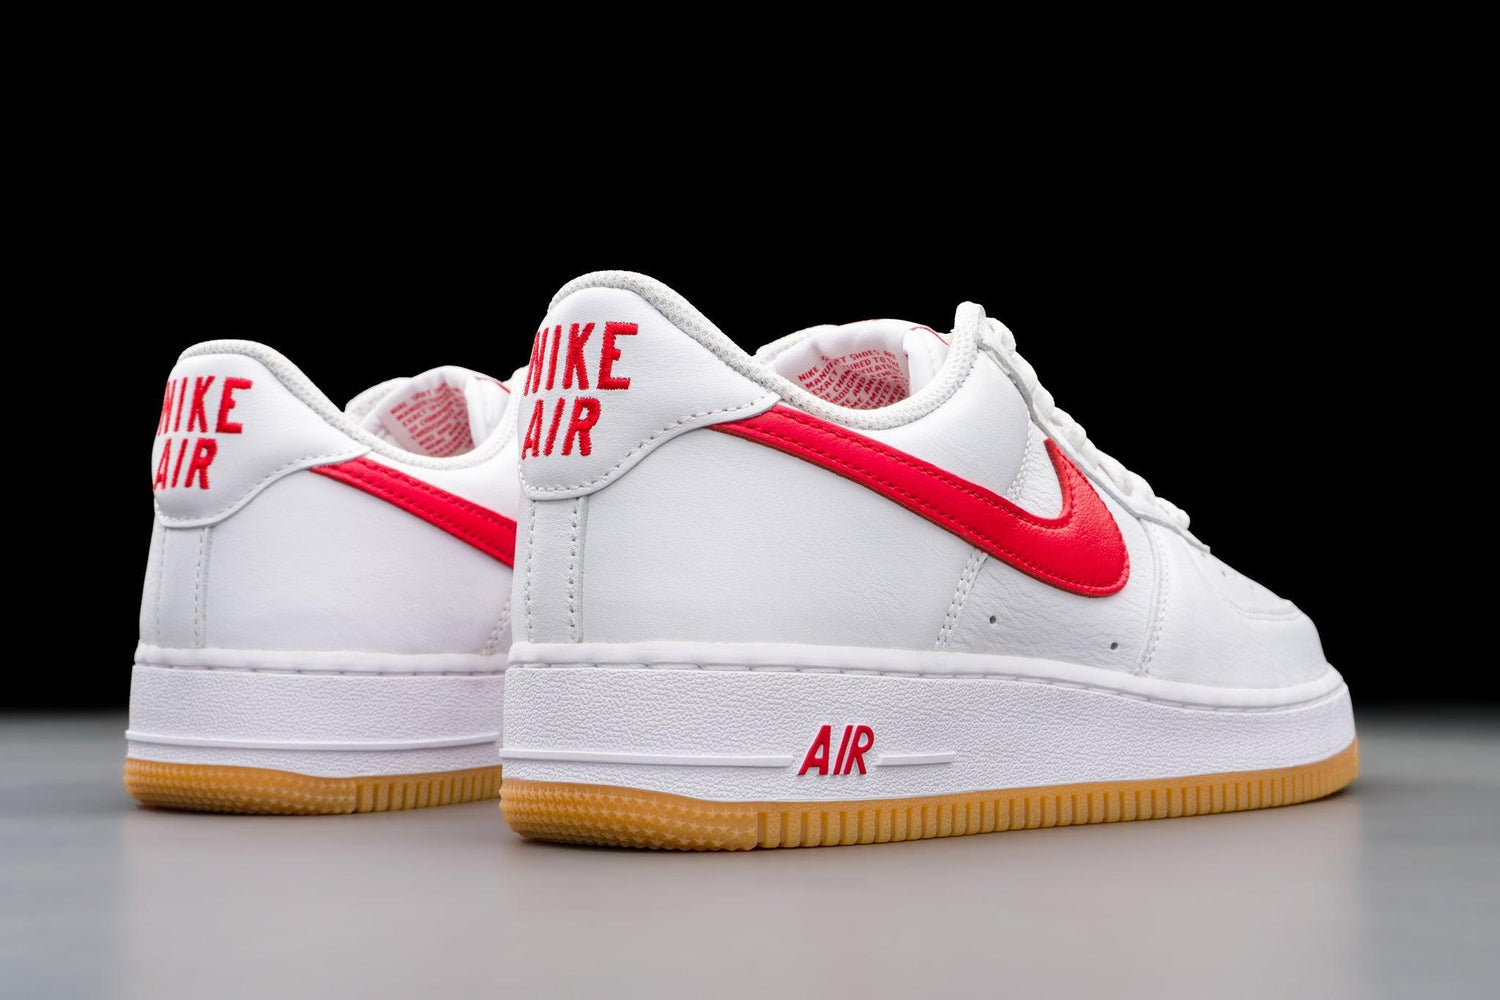 nike air force 1 07 low color of the month university red gum lo10m 6 1500x